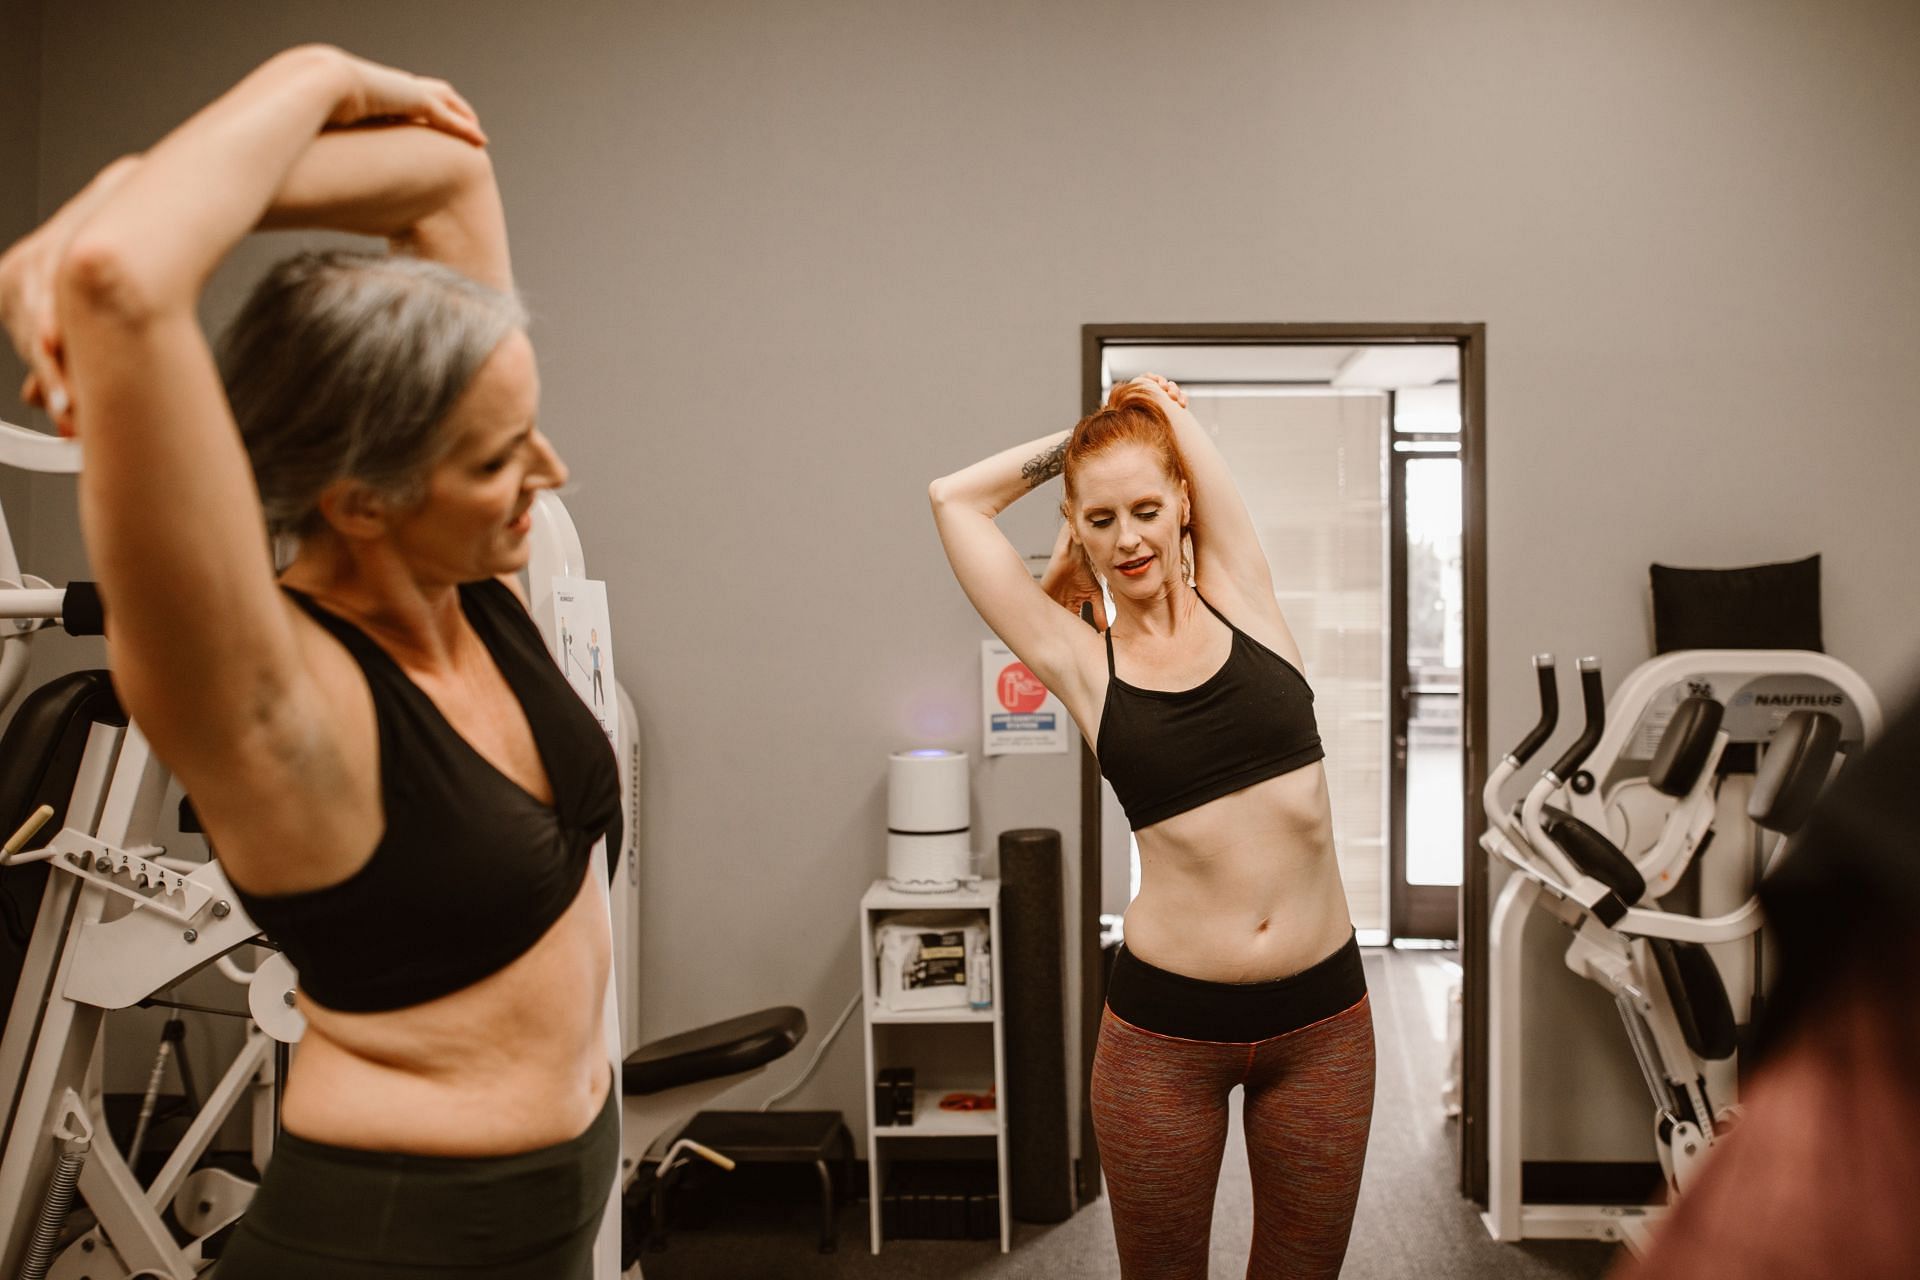 Workout mirror will help in correcting posture (Image via Pexels/Rodnae Productions)